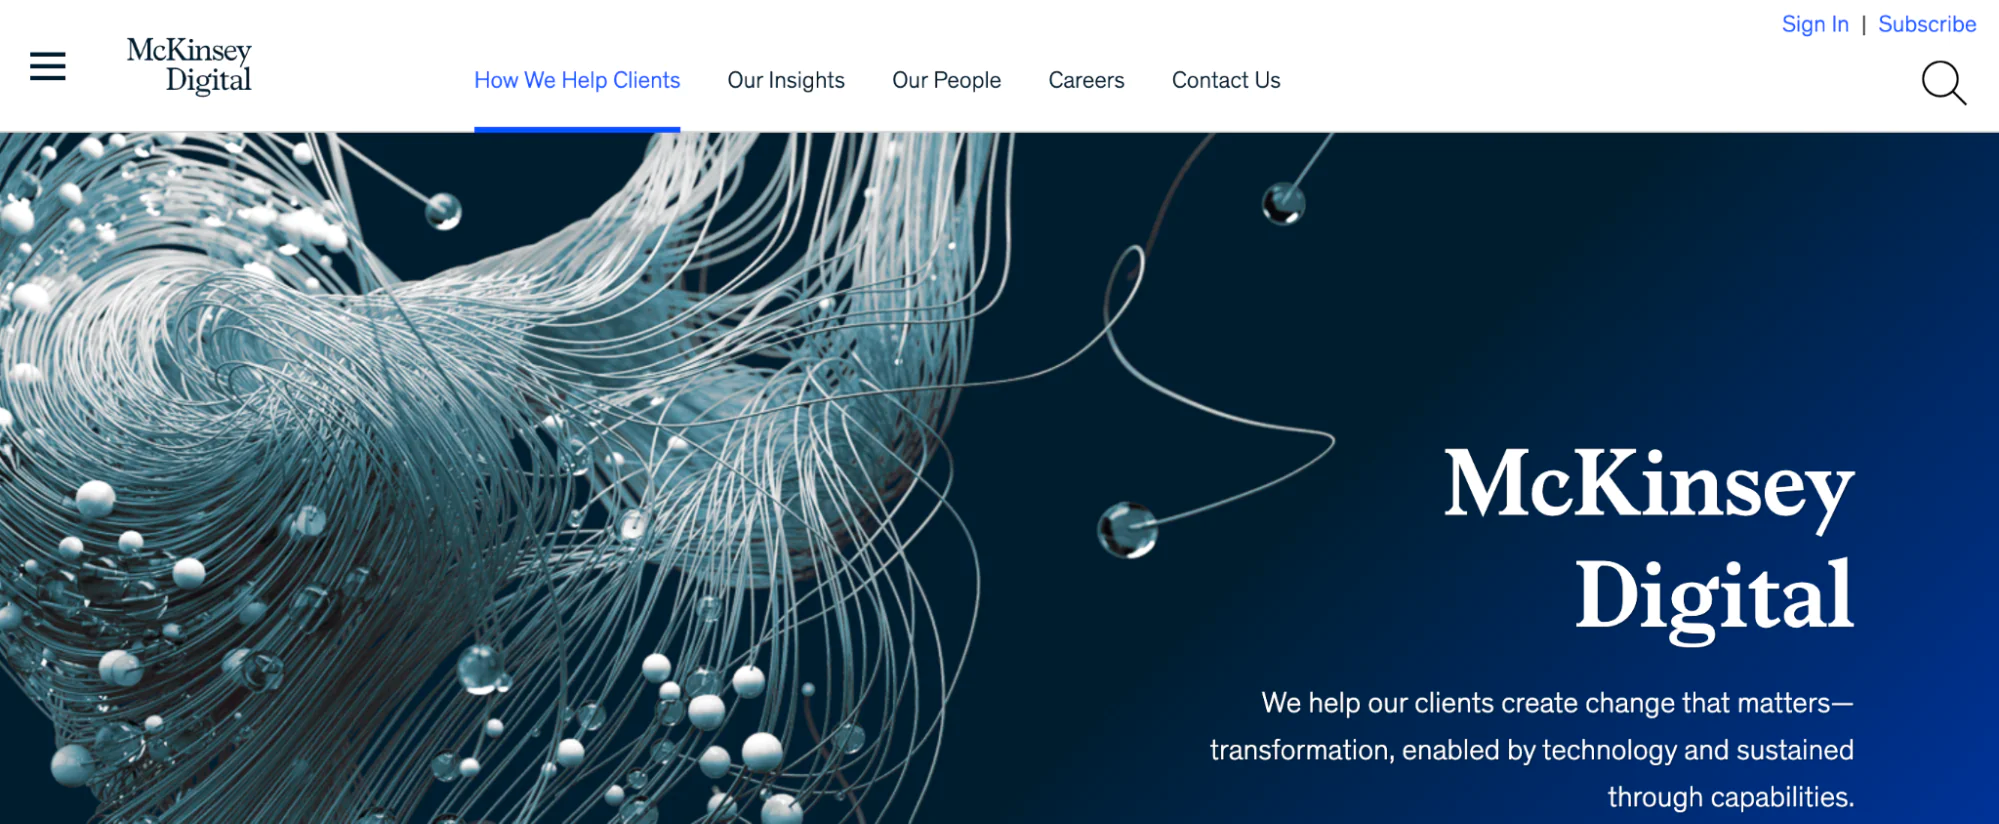 McKinsey Digital consultants homepage featuring and abstract blue and silver pattern.